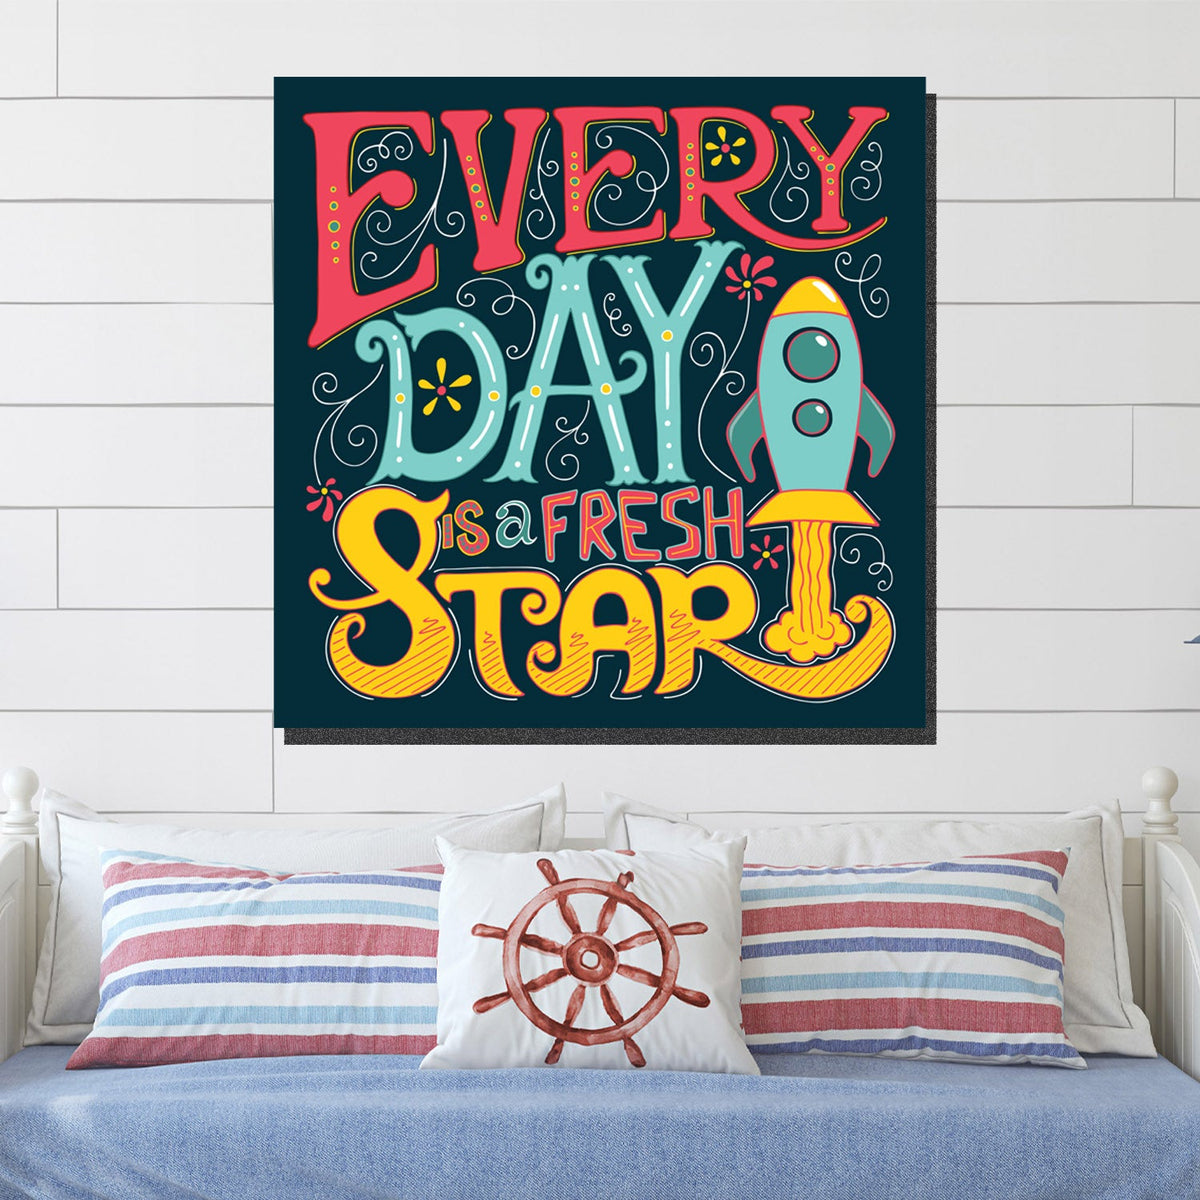 https://cdn.shopify.com/s/files/1/0387/9986/8044/products/EverydayCanvasArtprintStretched-1.jpg